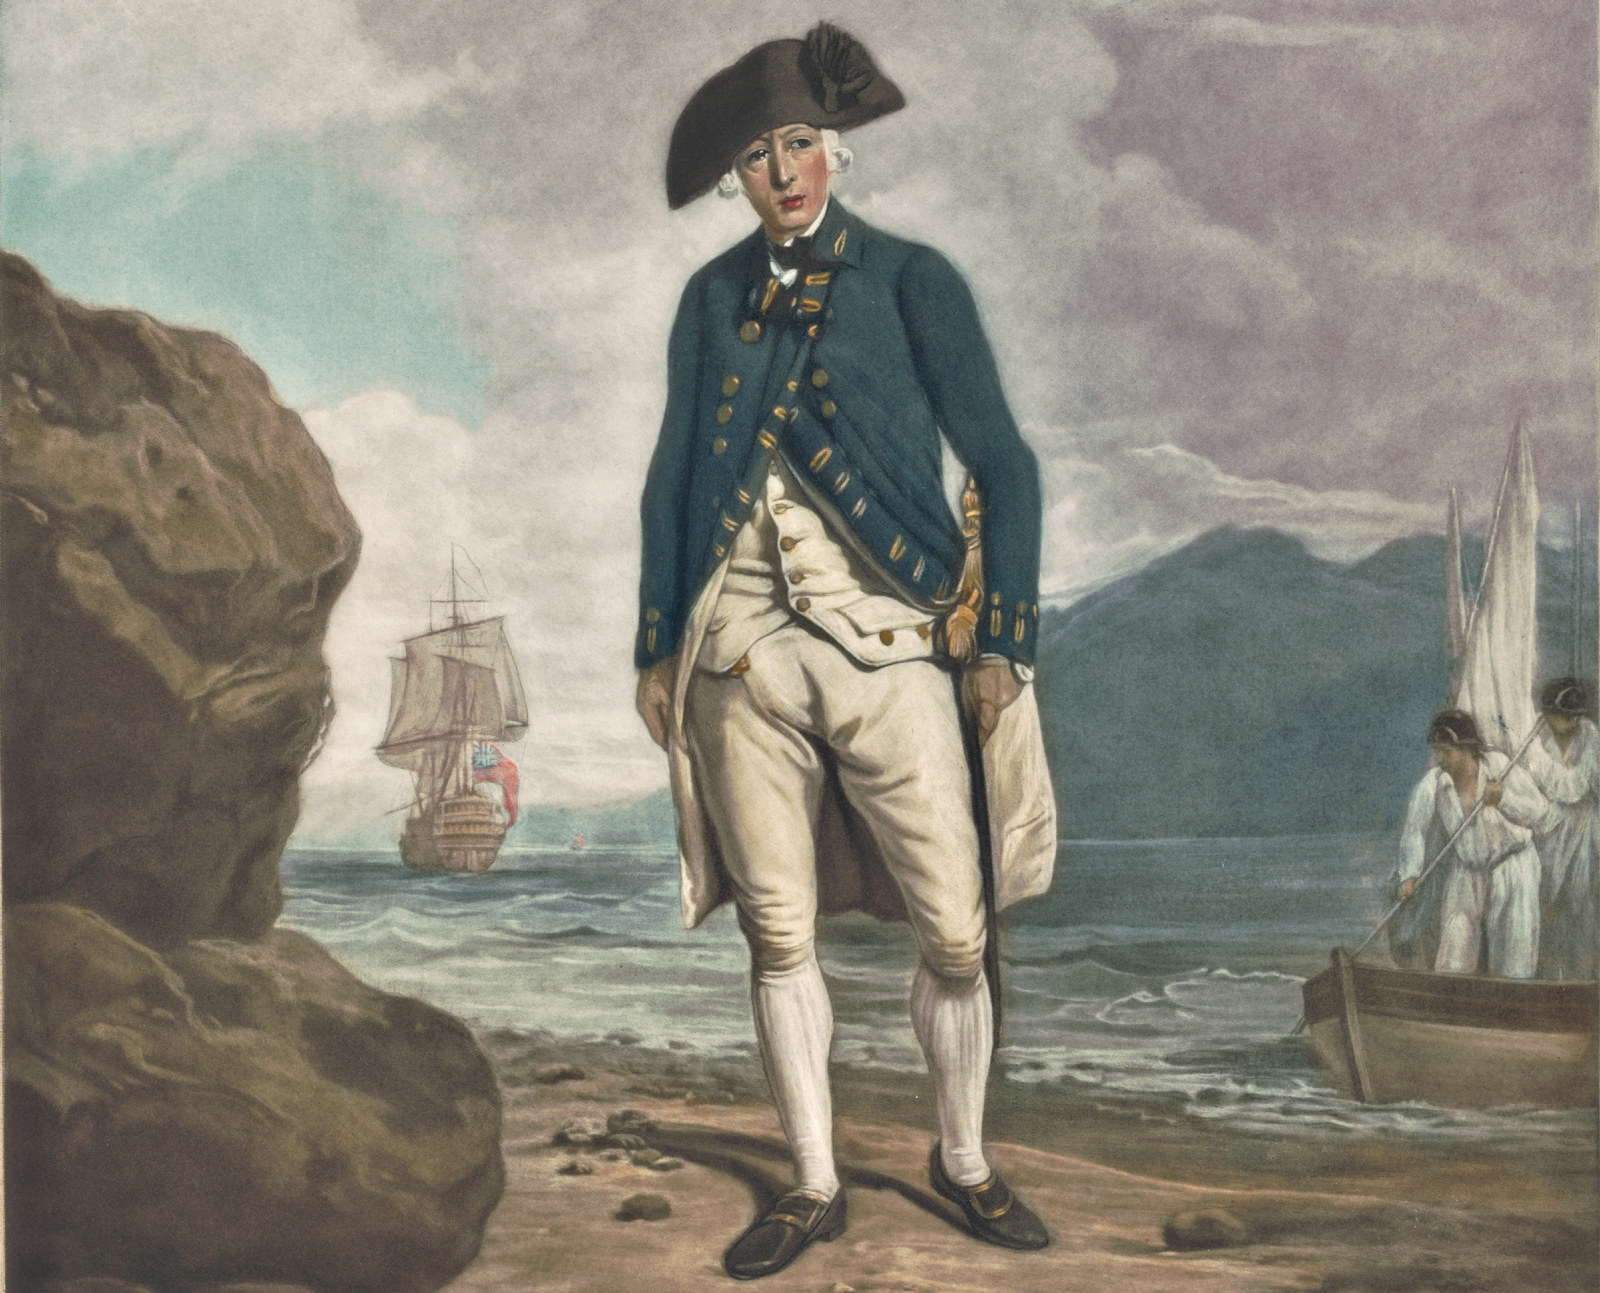 Portrait of man in uniform with black hat, standing on beach with ship and small boat in background.